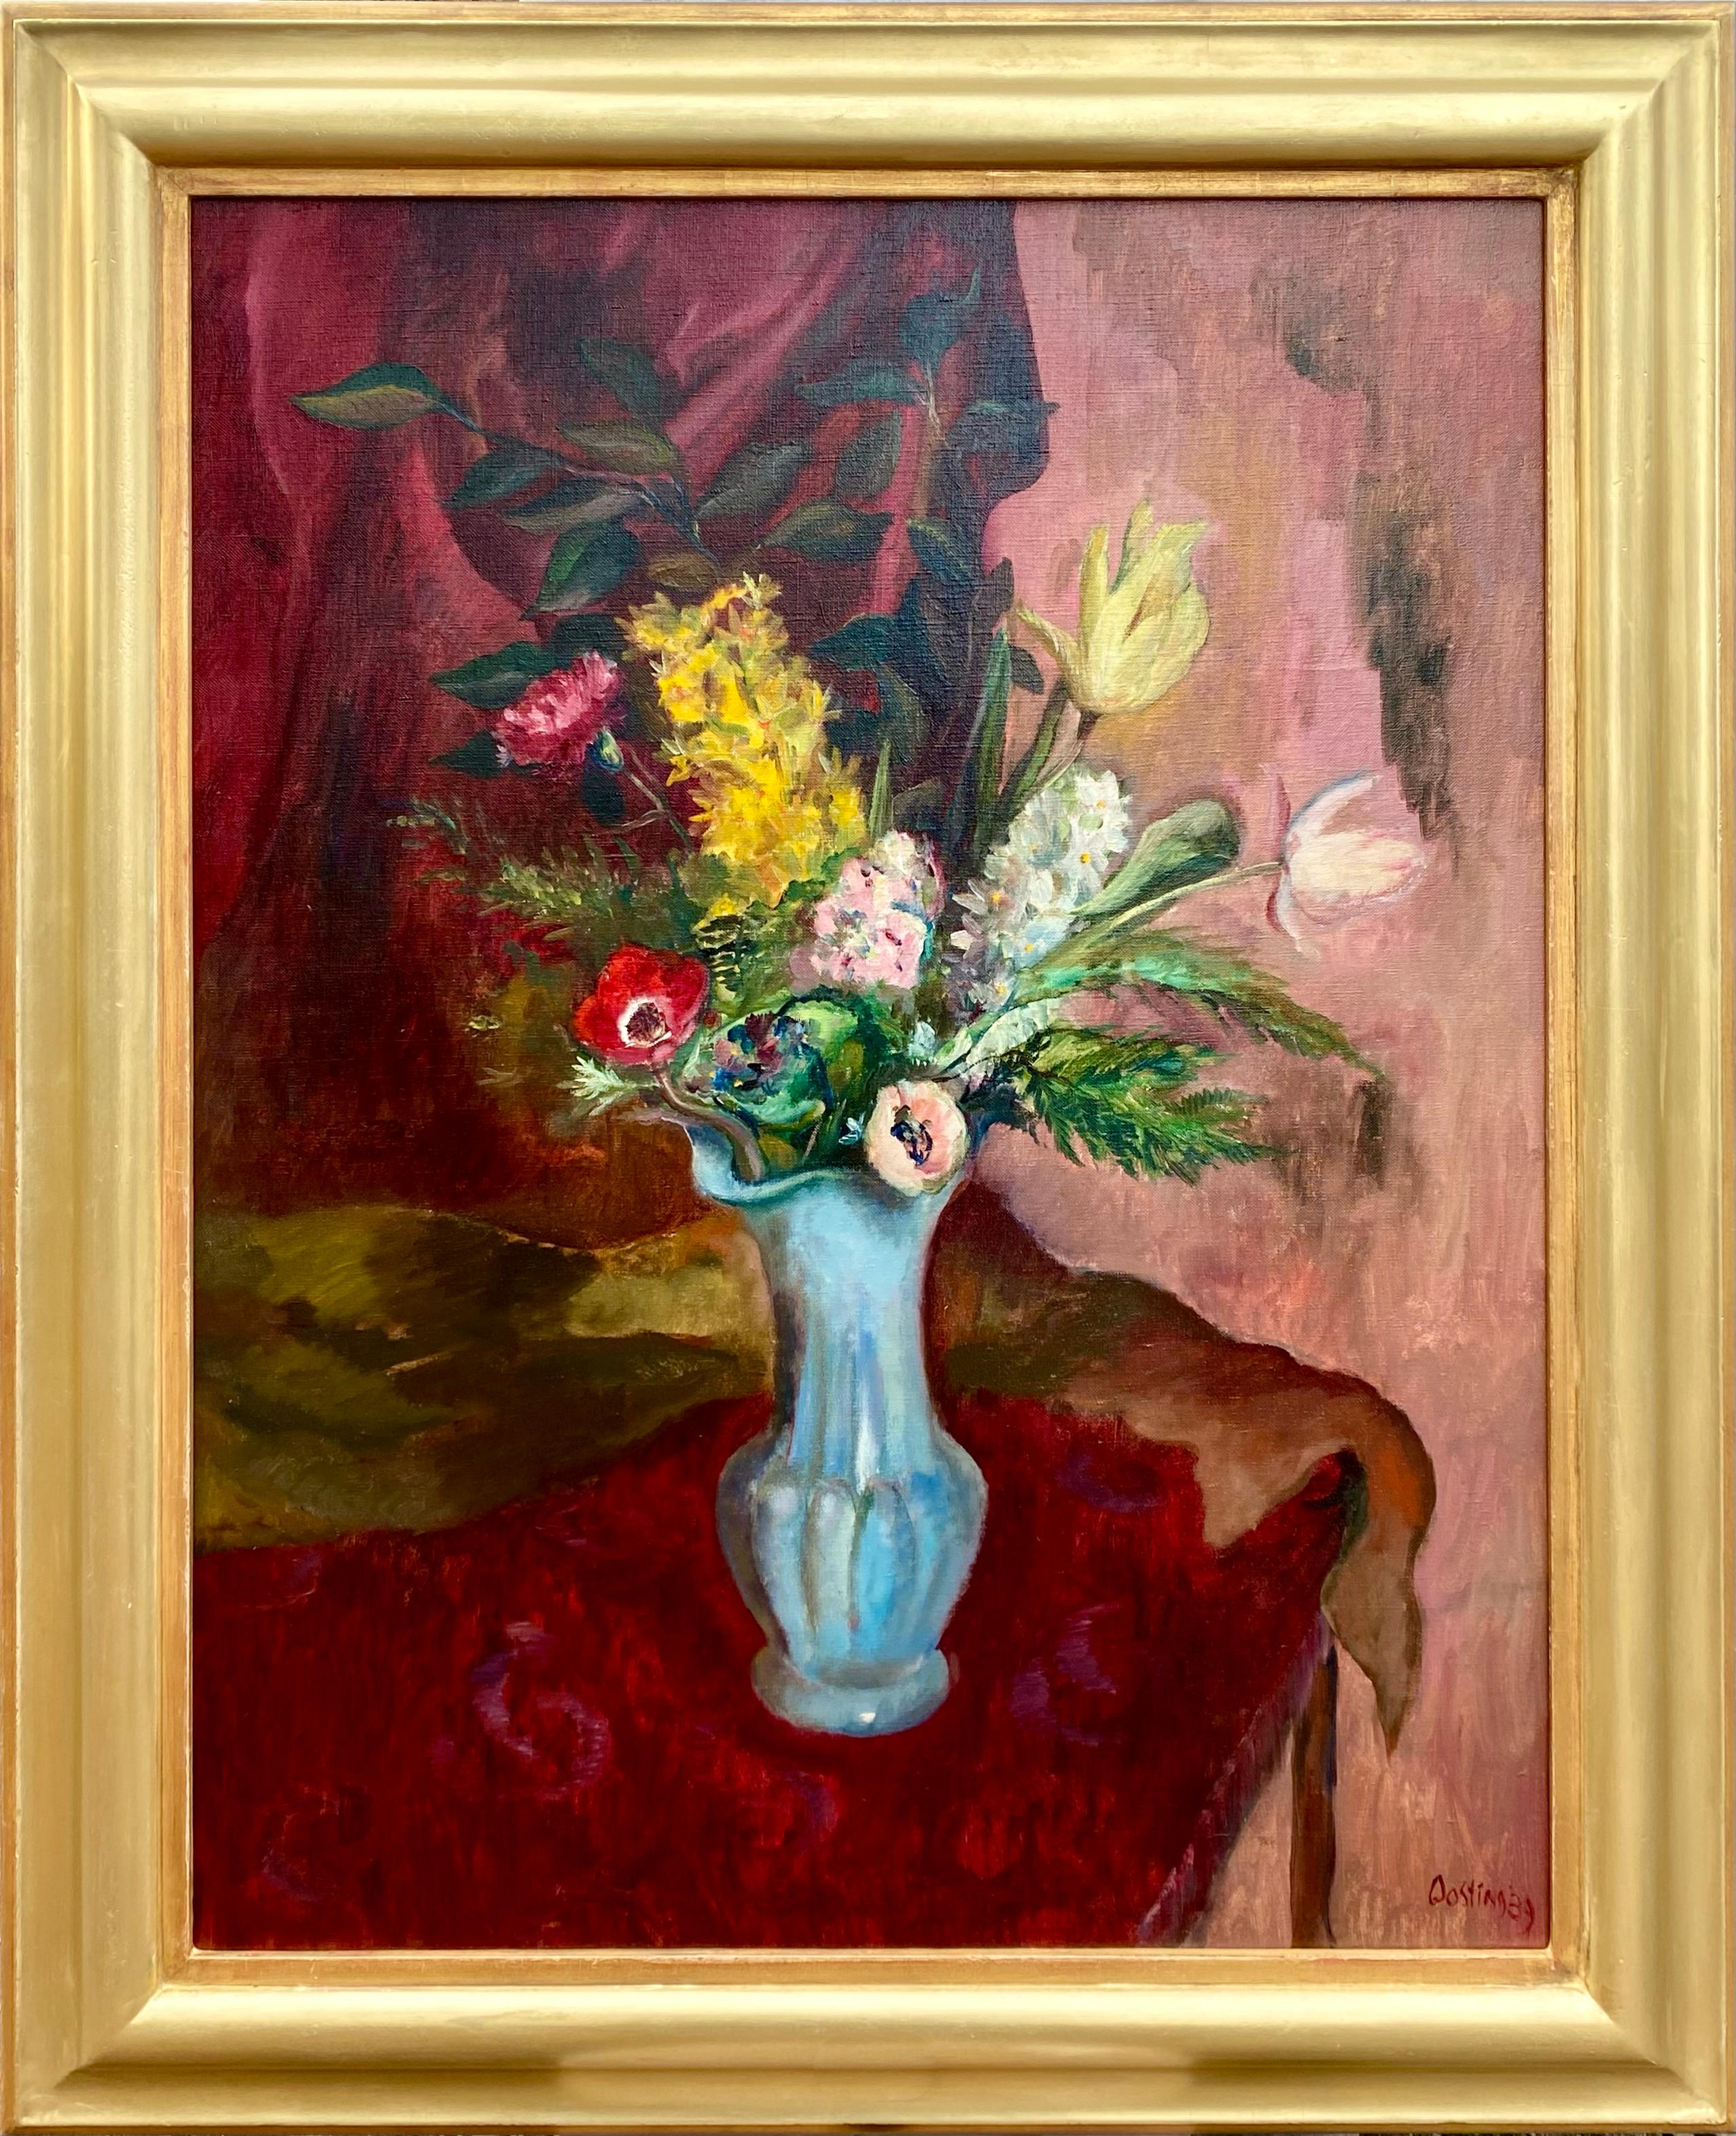 Bieruma Oosting Jeanne
Leeuwarden 1898 –  1994  Almen
Dutch Painter

'Spring Flowers in a Vase'

Signature: Signed lower right and dated 1939
Medium: Oil on canvas
Dimensions: Image size 101 x 81 cm, frame size 116 x 97 cm

Biography: Adriana